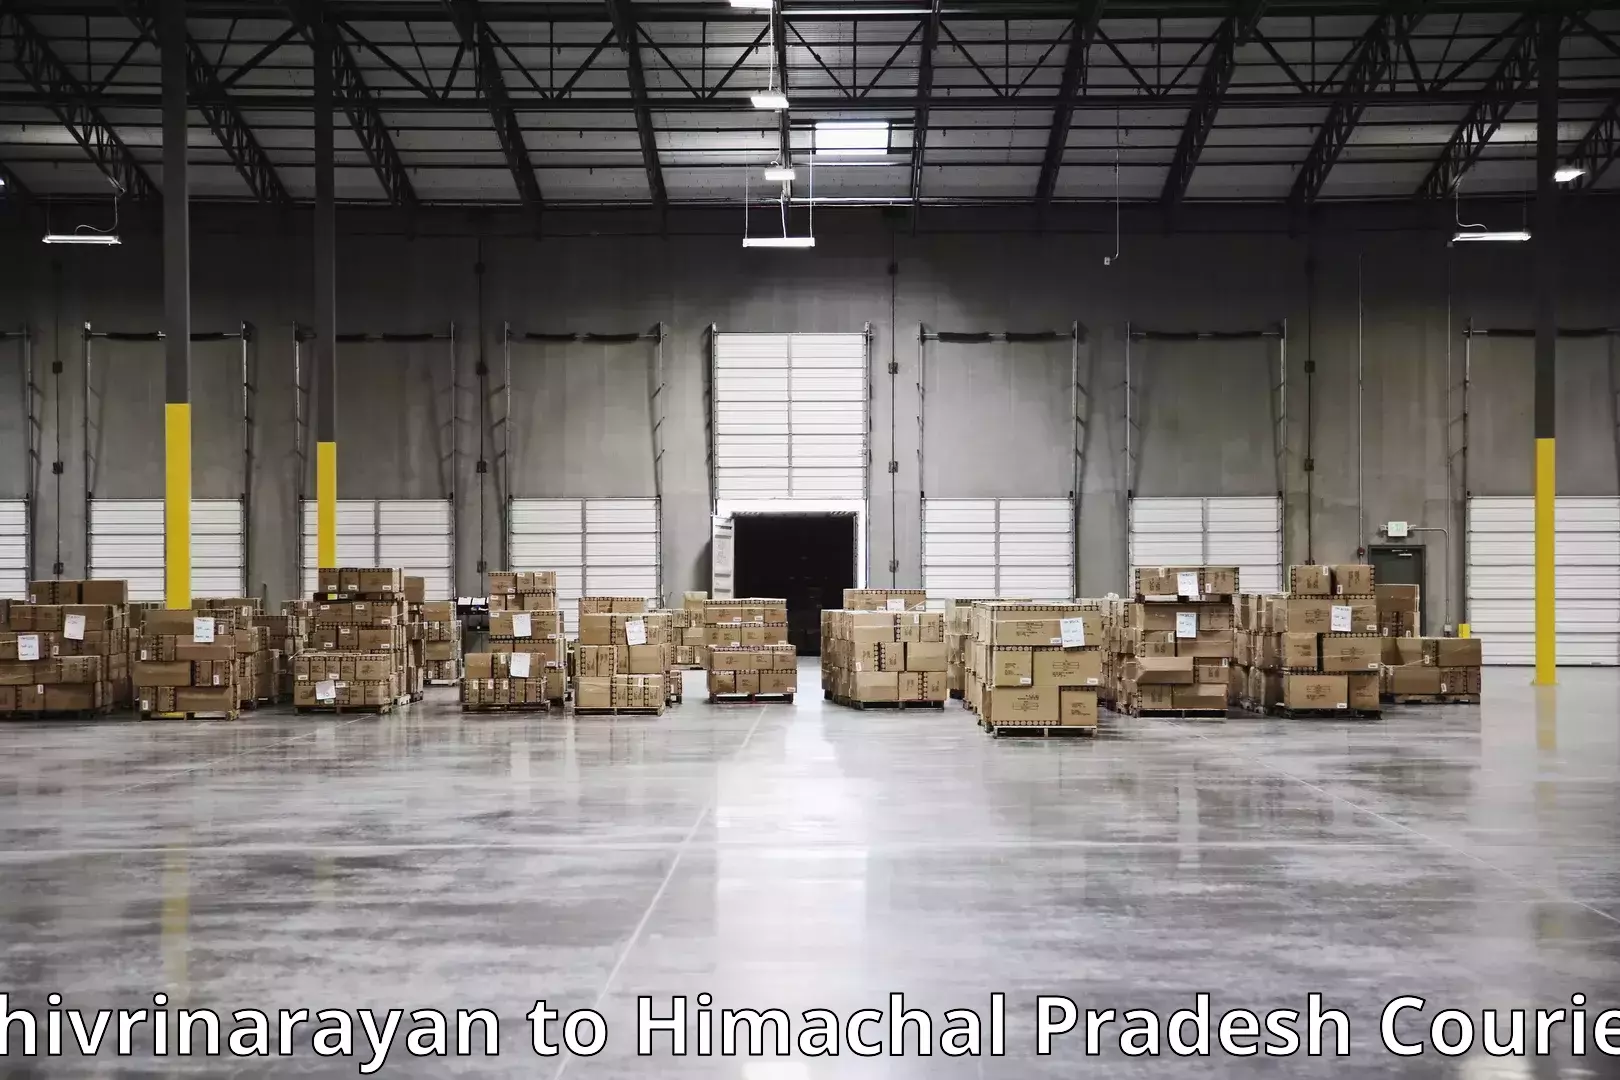 Professional packing services Shivrinarayan to YS Parmar University of Horticulture and Forestry Solan